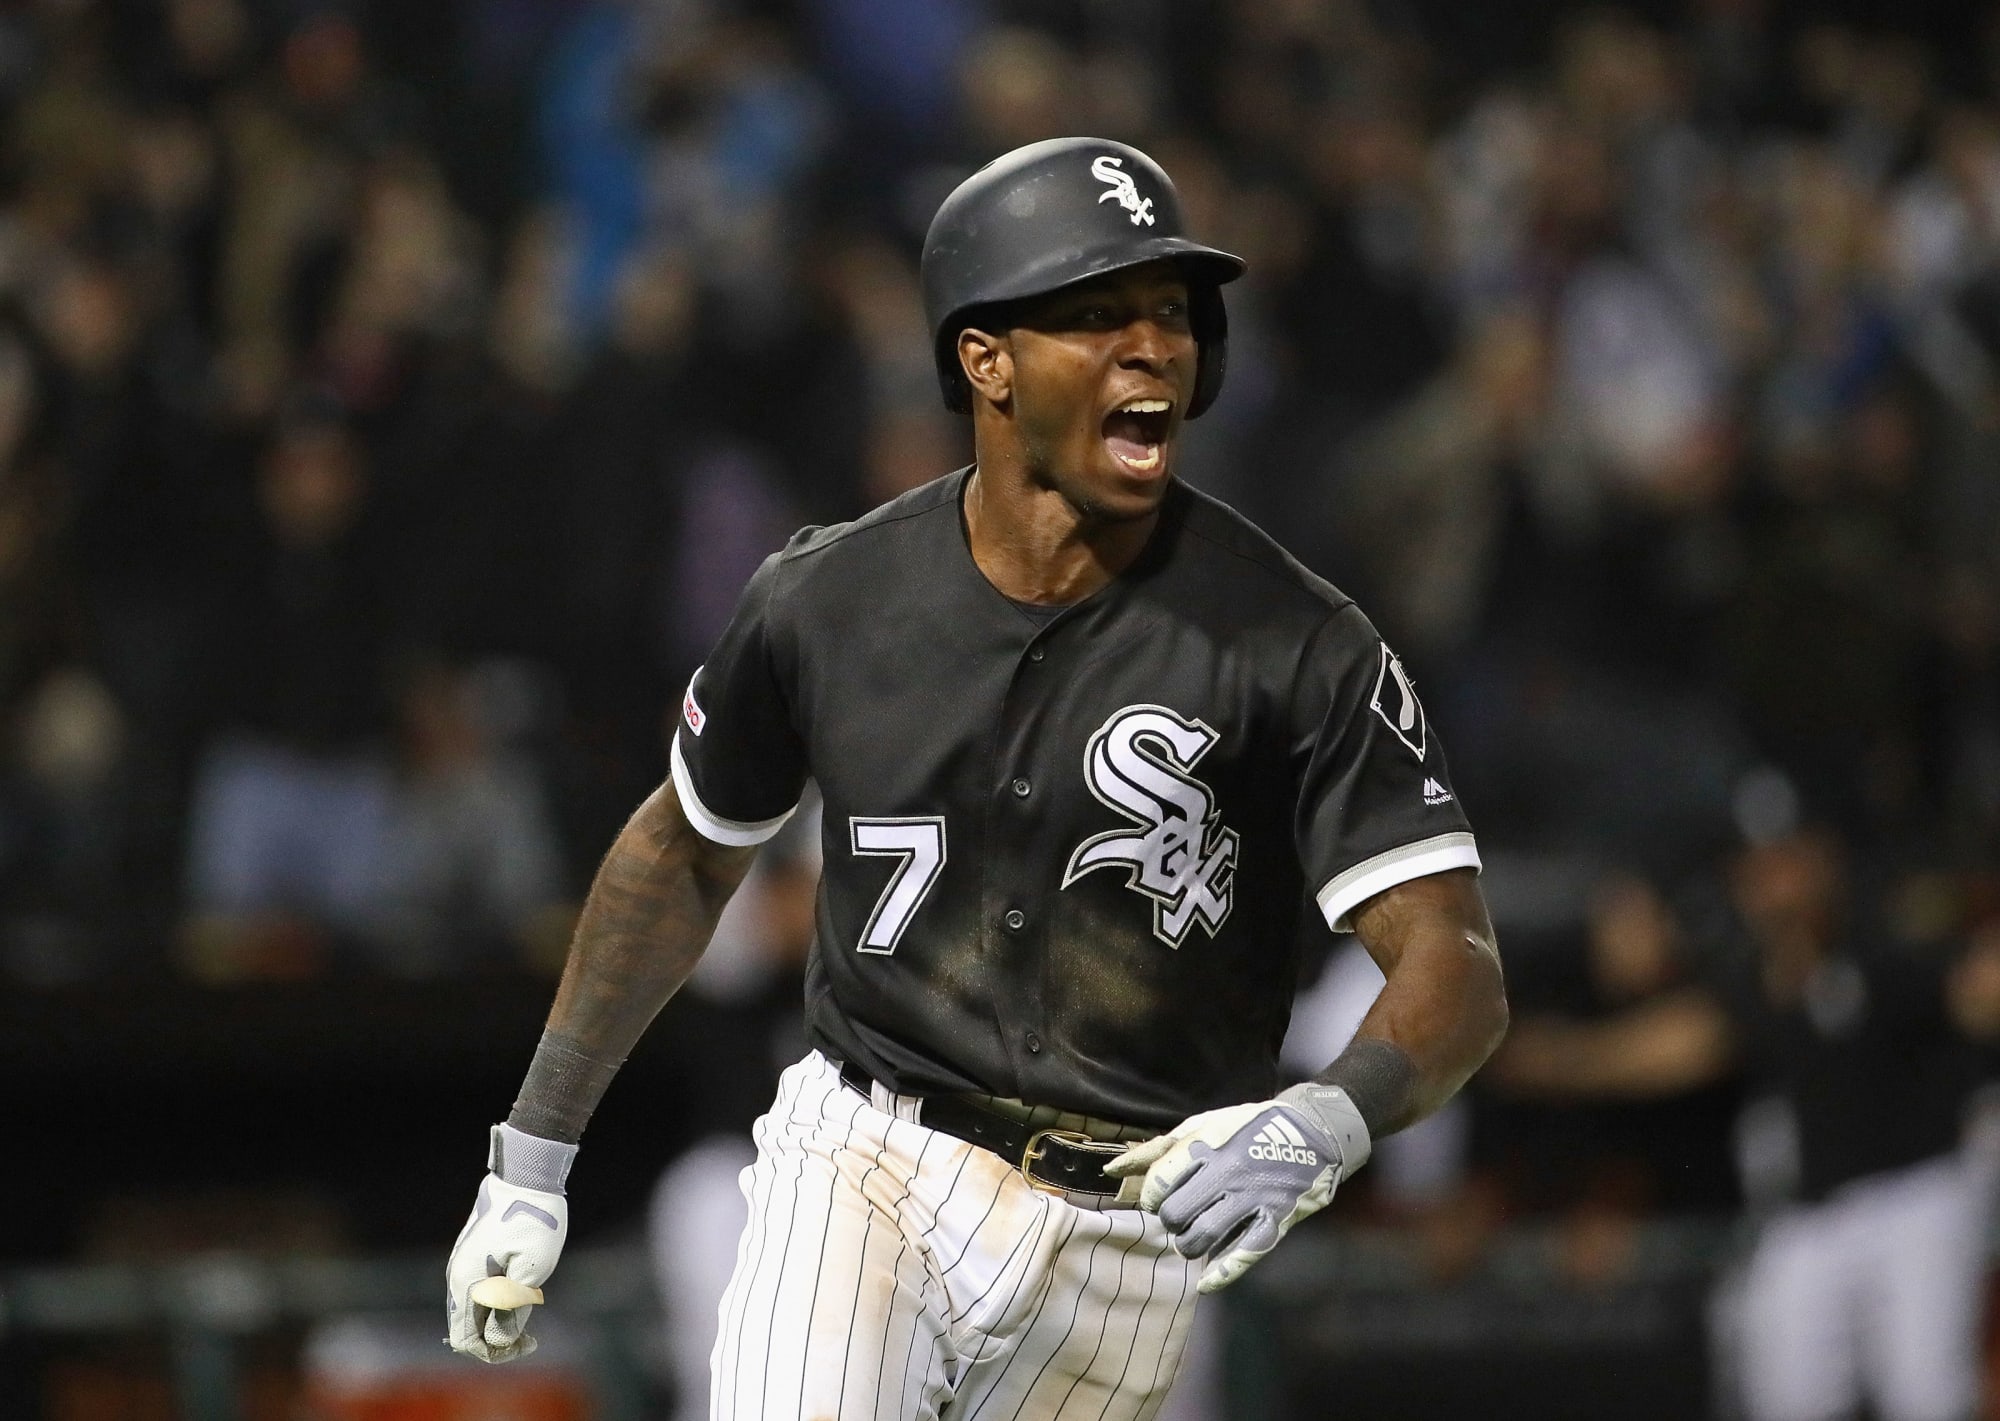 Does the White Sox April Performance Change Anything?